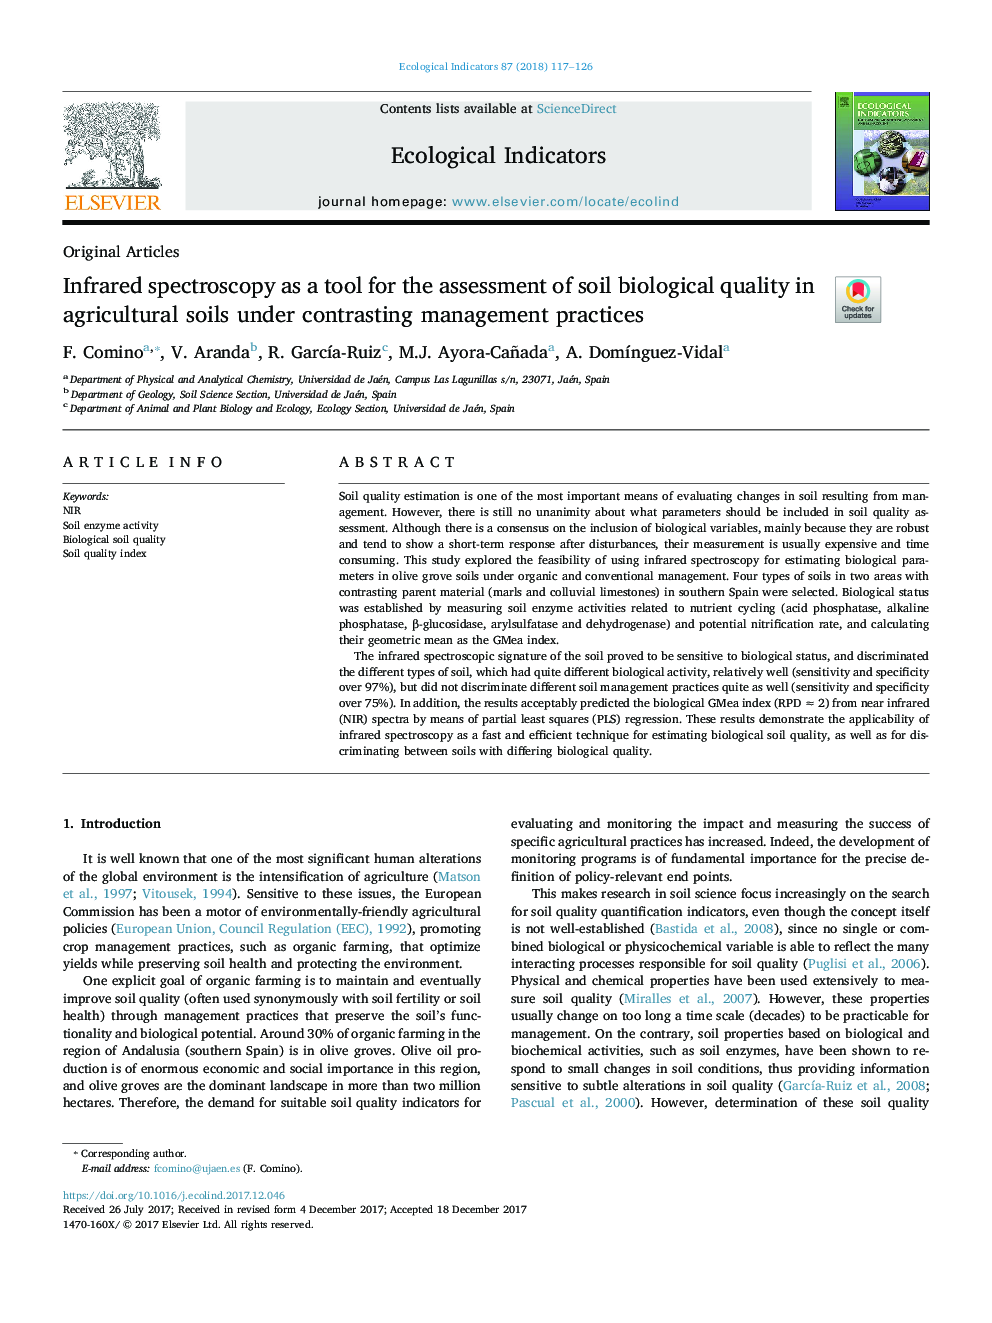 Infrared spectroscopy as a tool for the assessment of soil biological quality in agricultural soils under contrasting management practices